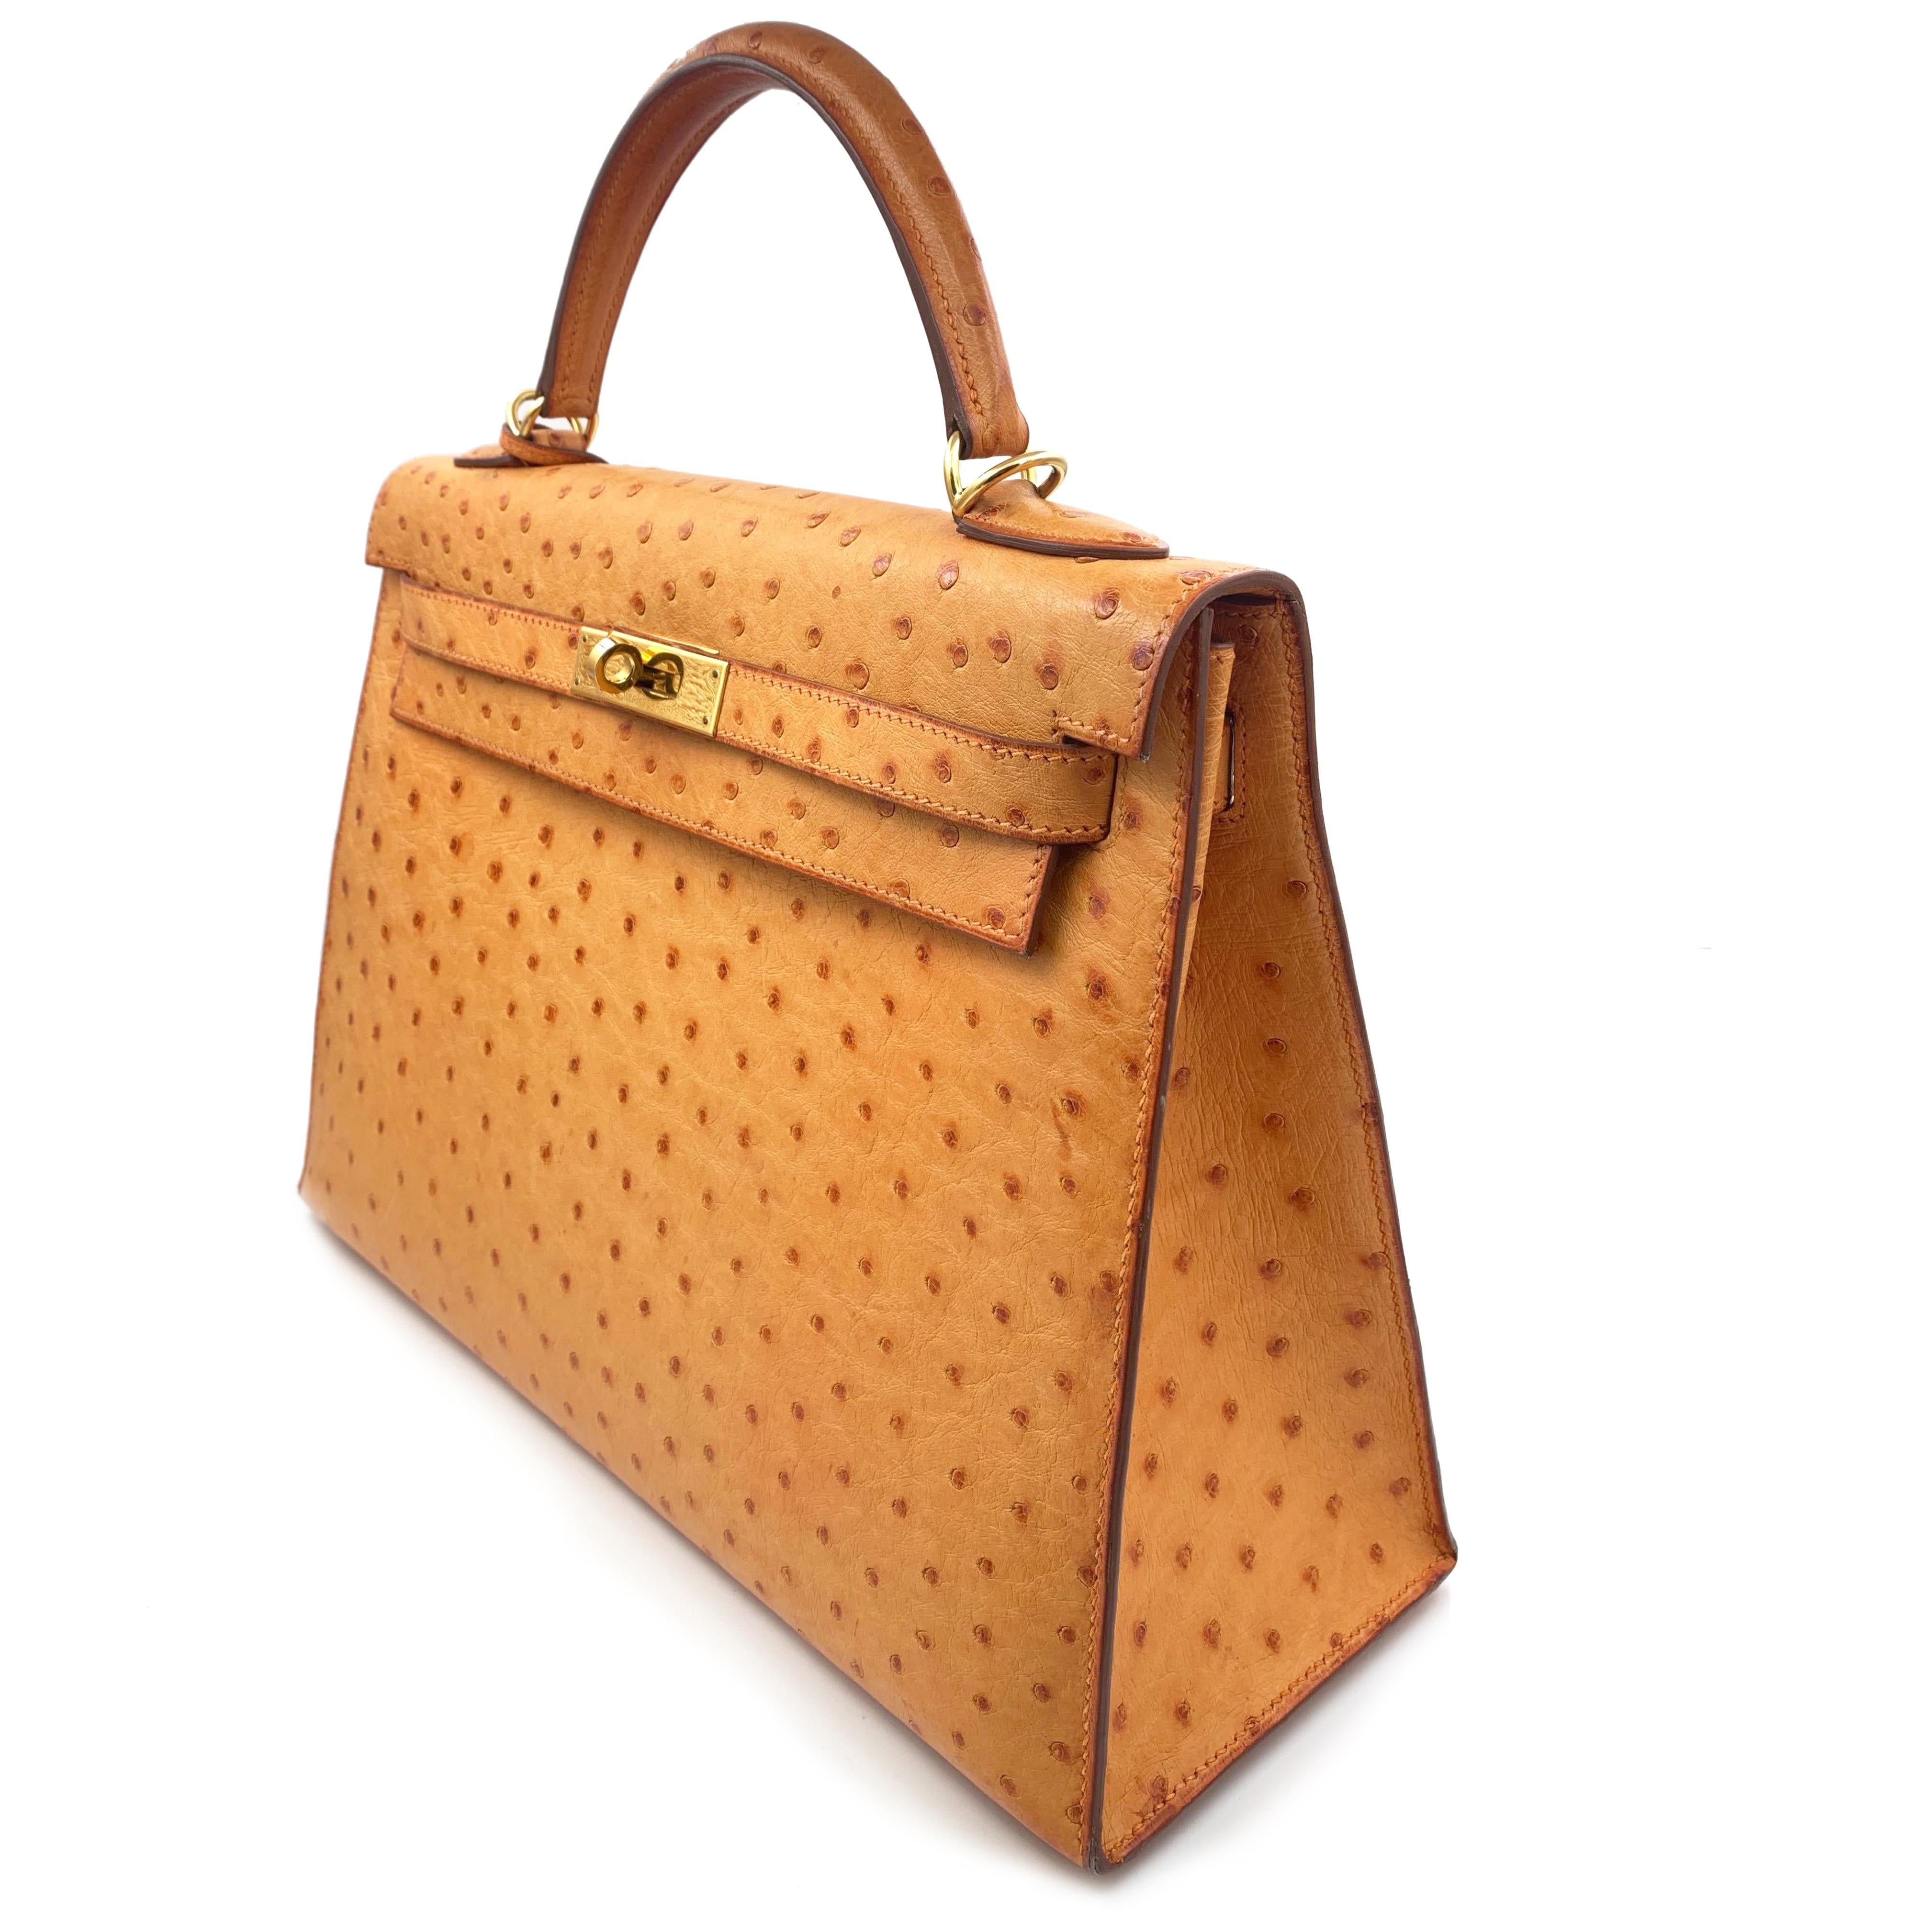 Hermes Kelly 30 Ostrich Leather Gold Tone Hardware Ladies Handbag

This is pre-owned Hermes kelly 30 Ostrich Leather Gold Tone hardware Ladies Handbag.
The bag has minor signs of use as visible in pictures.
Very minor signs of wear on corners.